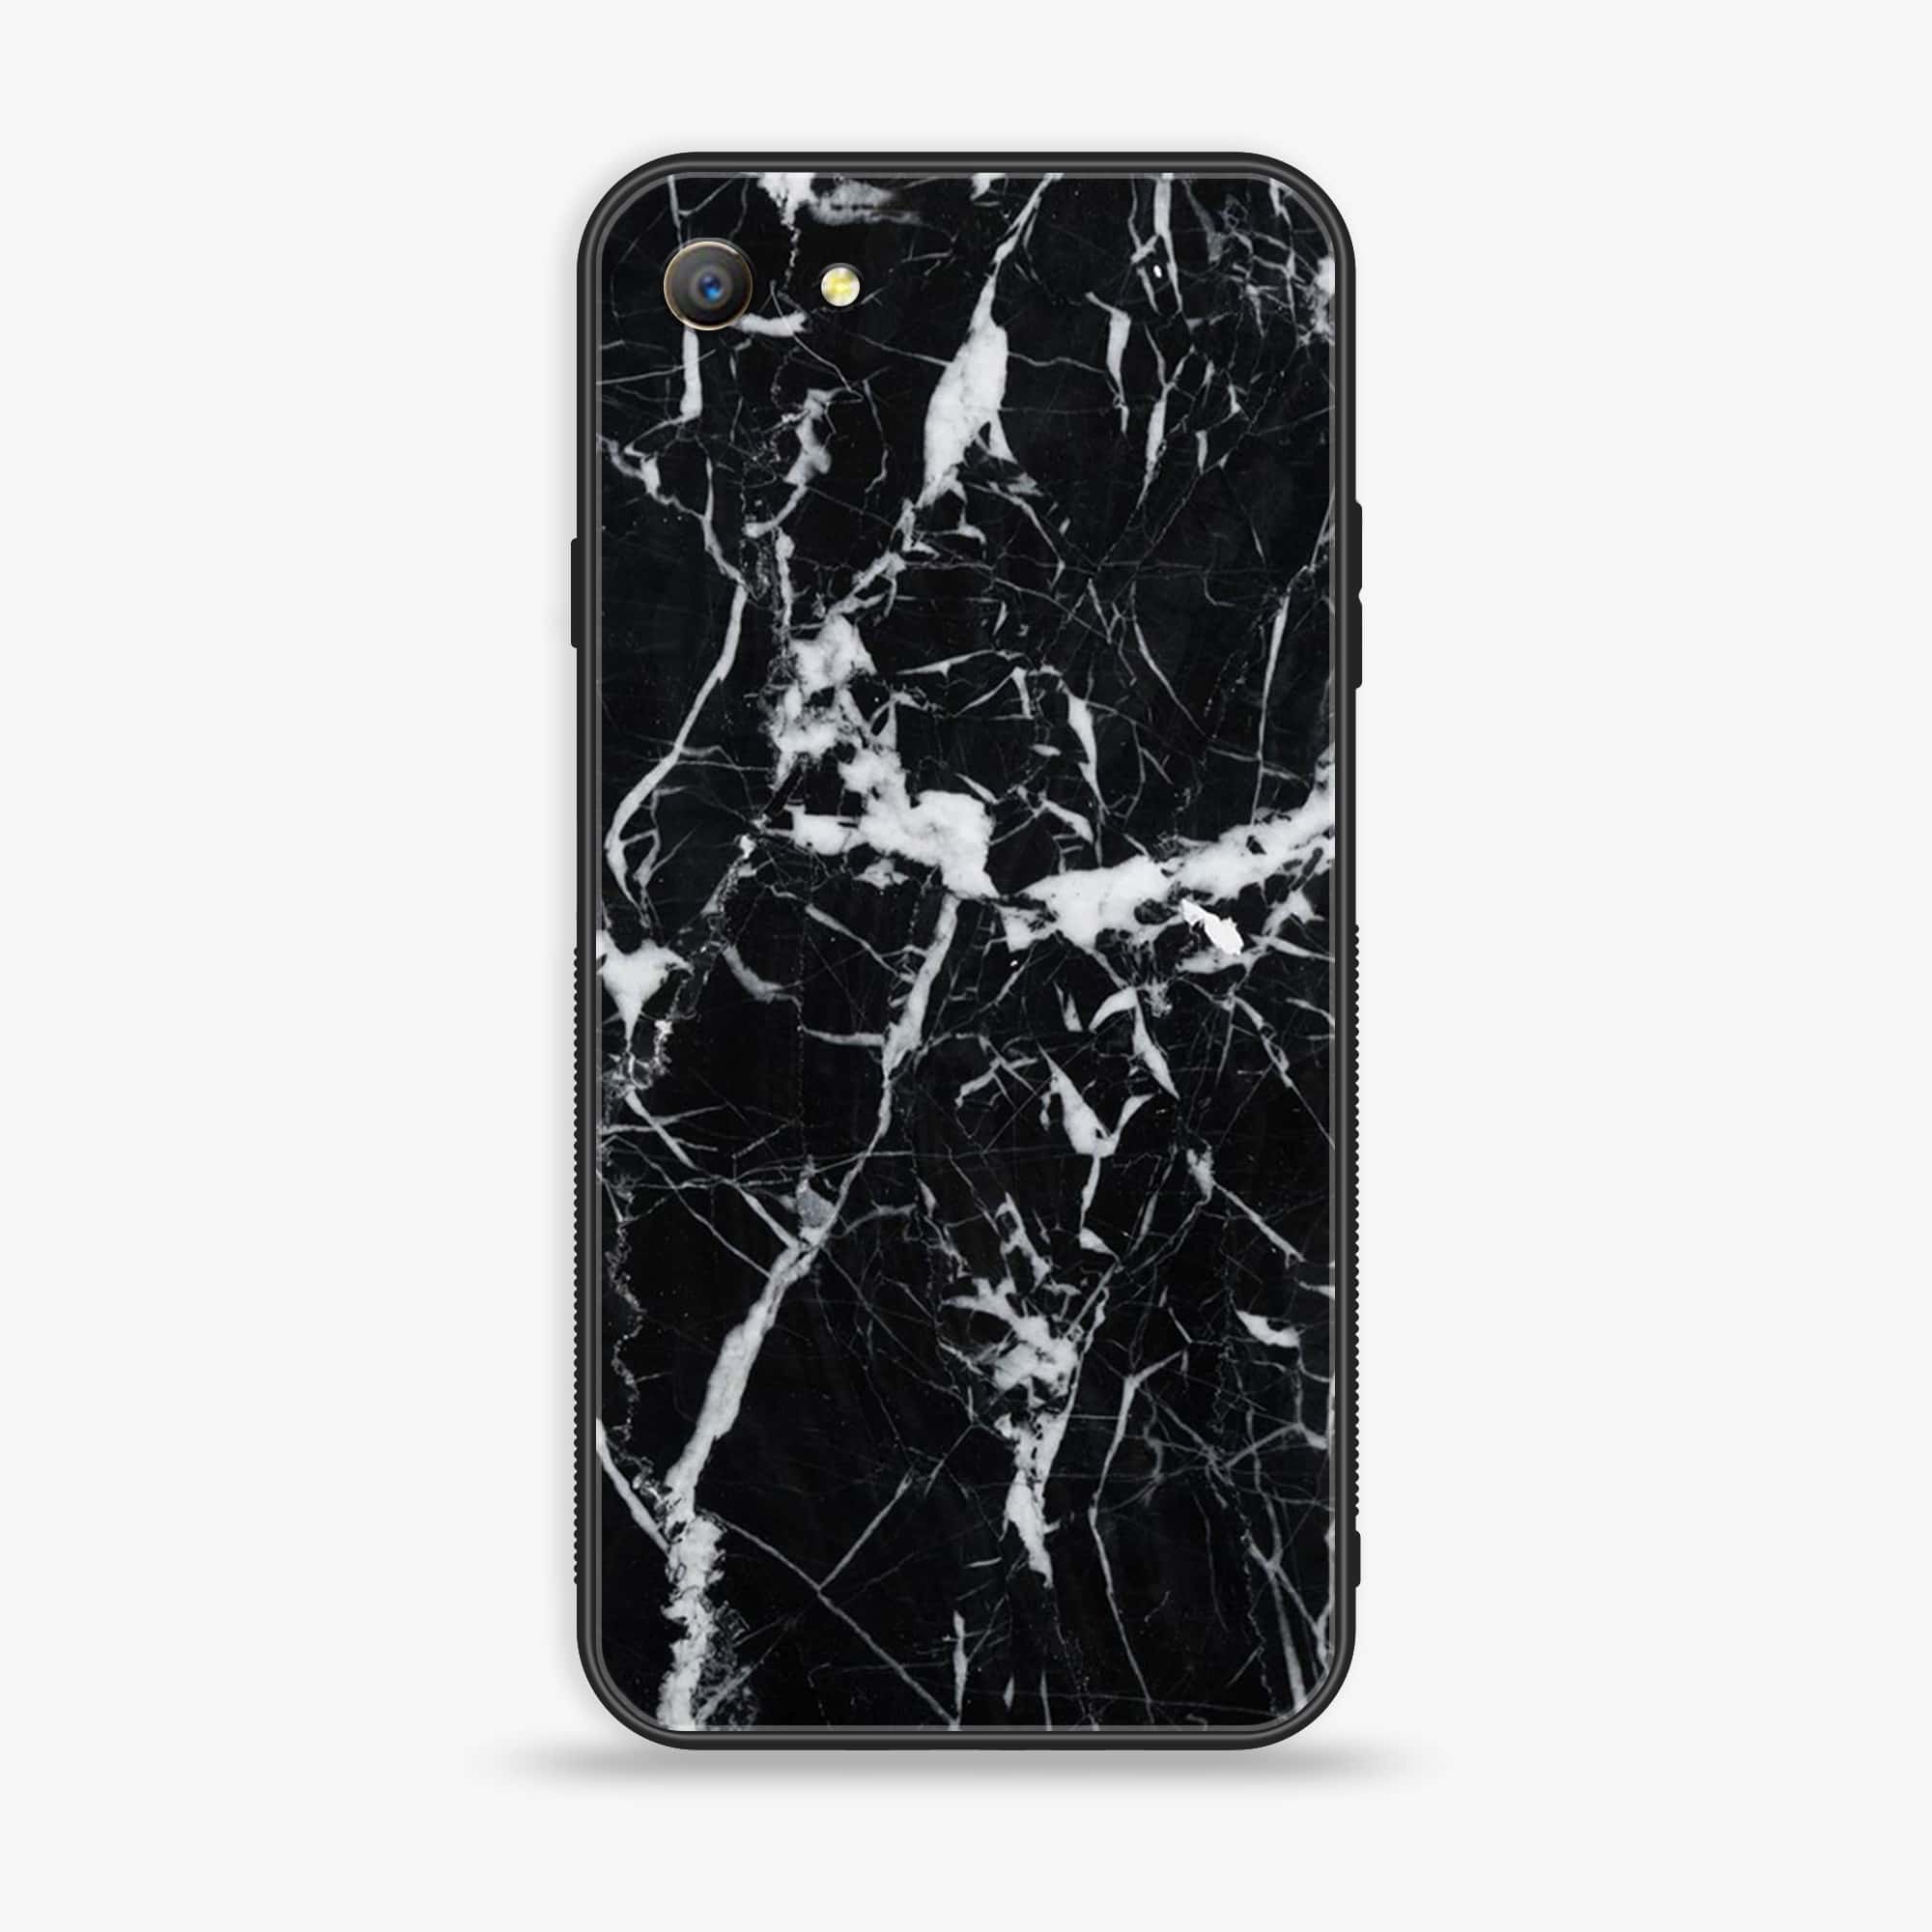 Oppo A57 Black Marble series Premium Printed Glass soft Bumper shock Proof Case